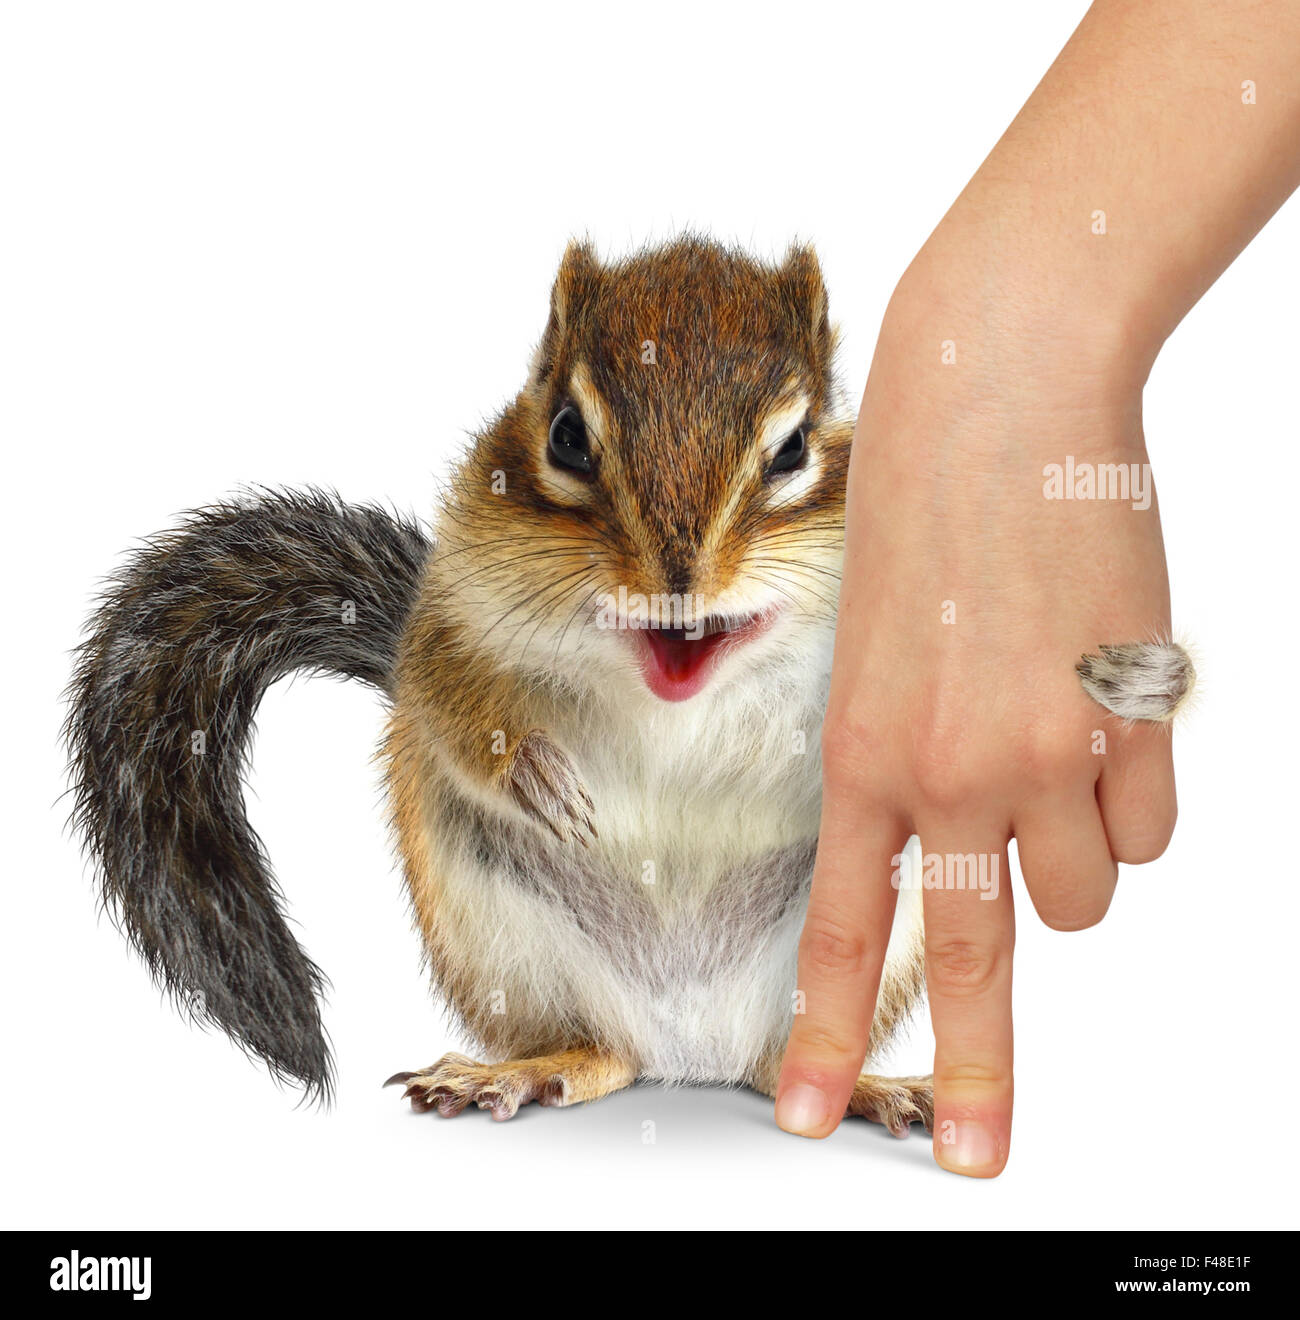 Animal care concept, squirrel hugs human hand on white background Stock Photo